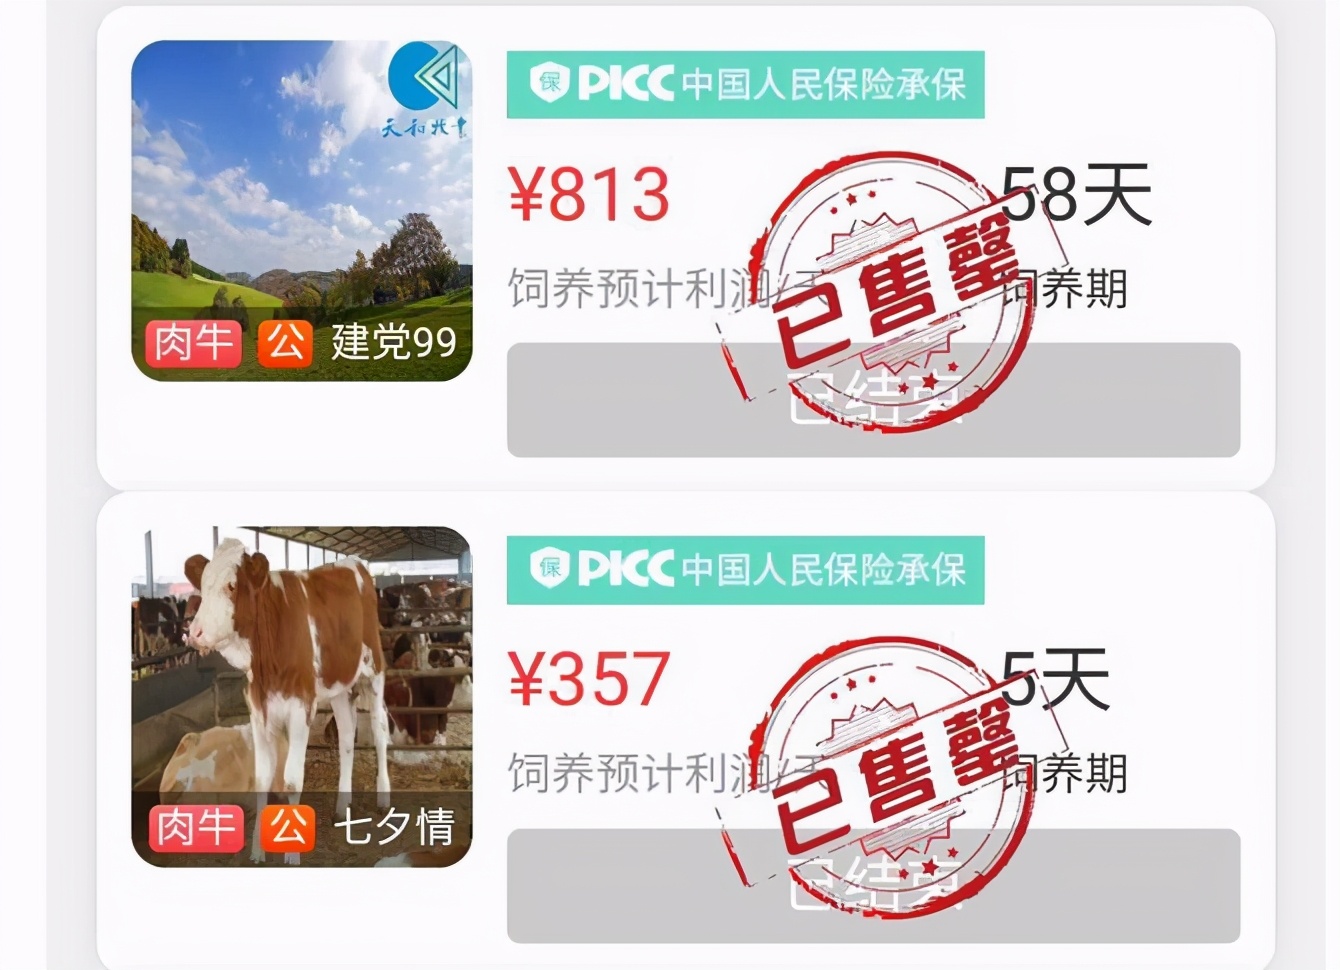 The heat that raise a cattle is ecbolic give a kind of new-style fraud that raise a cattle, many people by " Yun Yangniu " cheated hundred thousands of